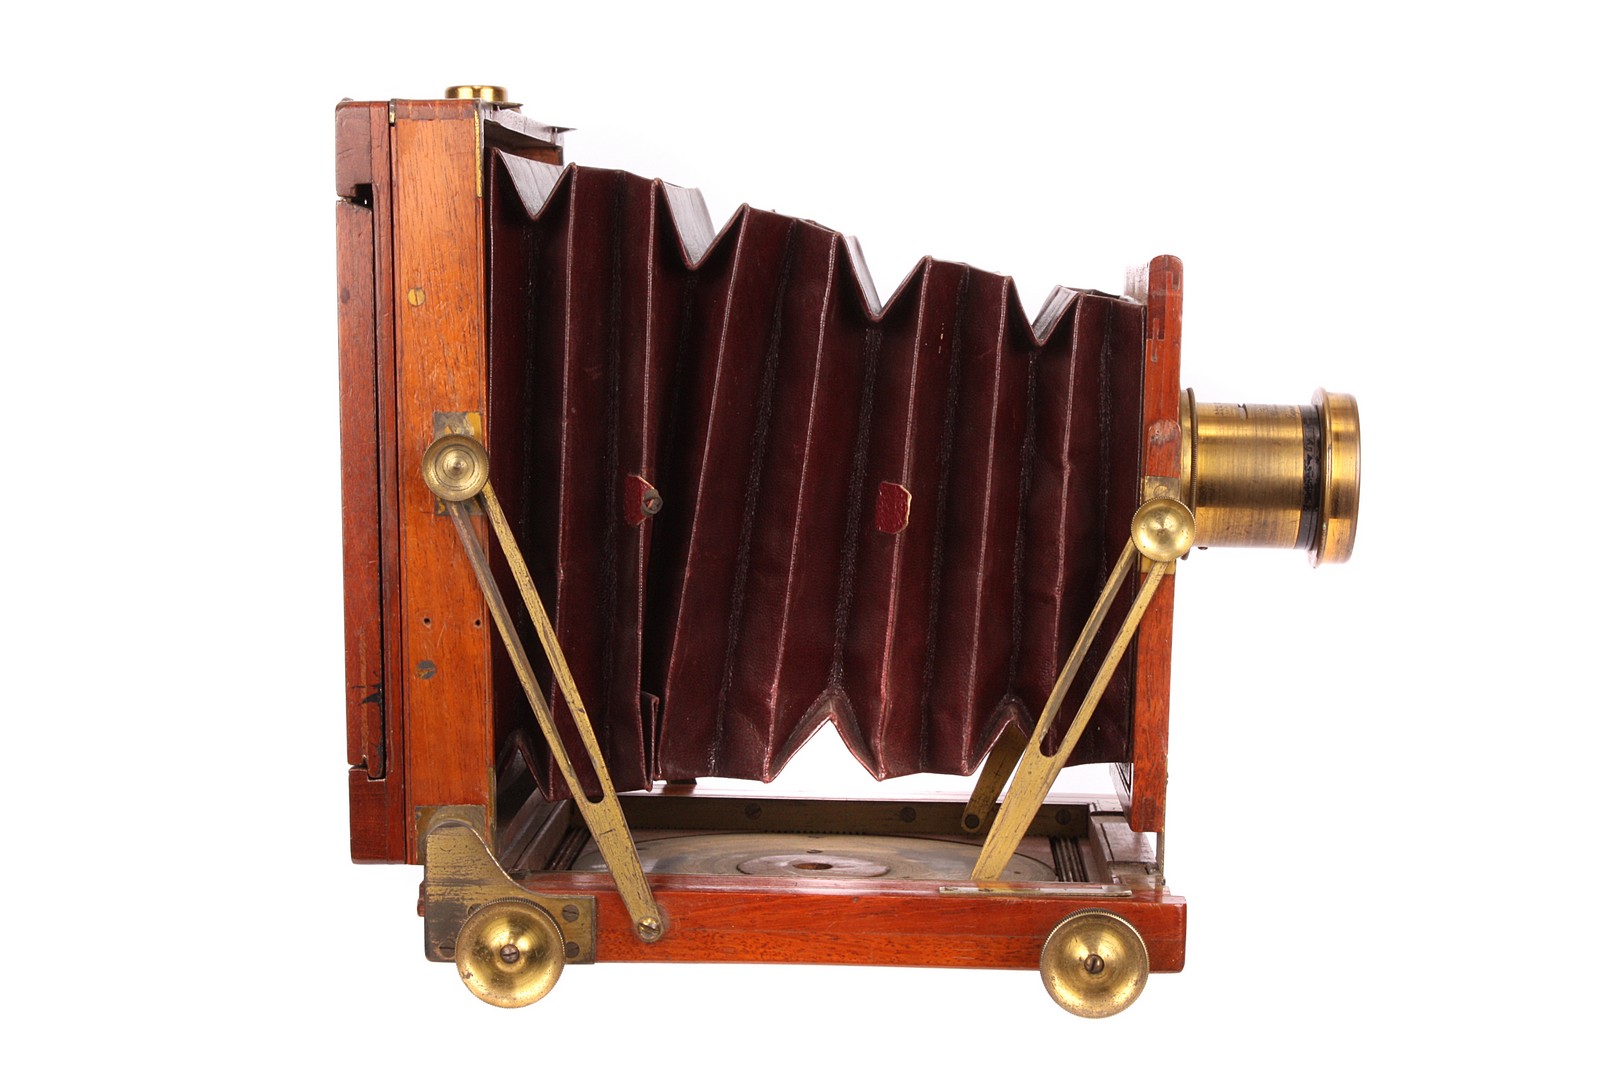 A Mc Kellen’s Treble Patent Mahogany Field Camera, 4½x6¼, with Clement & Gilmer Rapid Symmetrical - Image 3 of 4